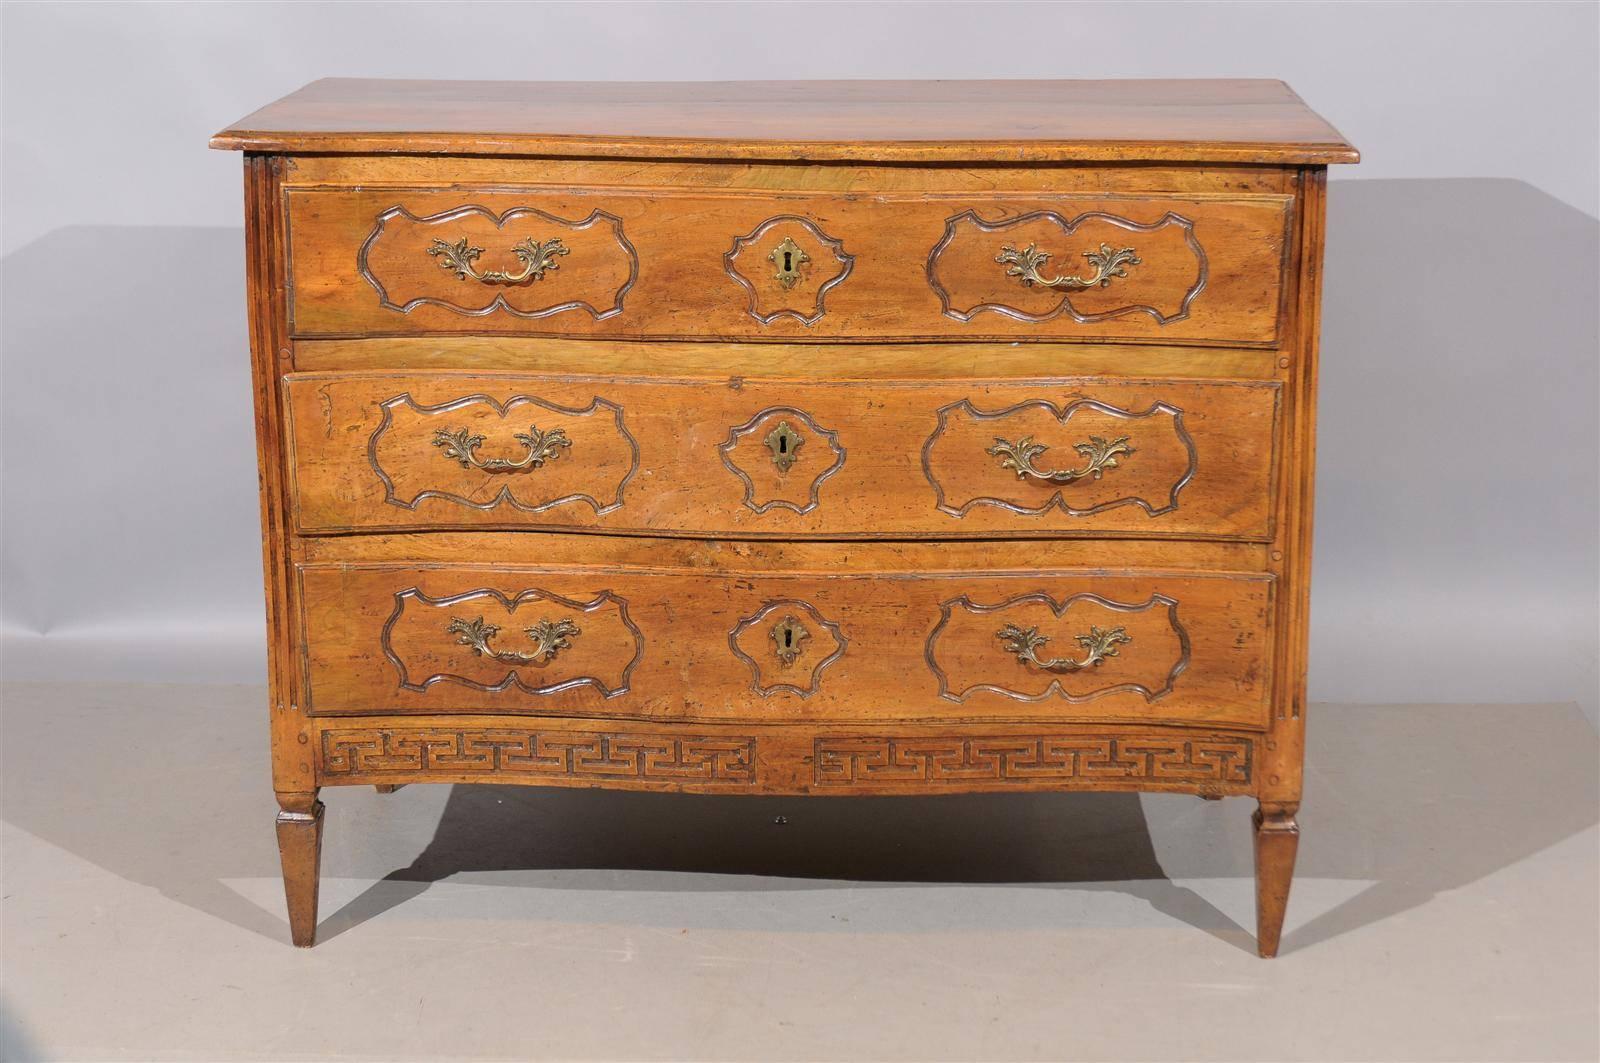 Italian Transitional Walnut Commode with Greek Key Carving, Late 18th Century 3